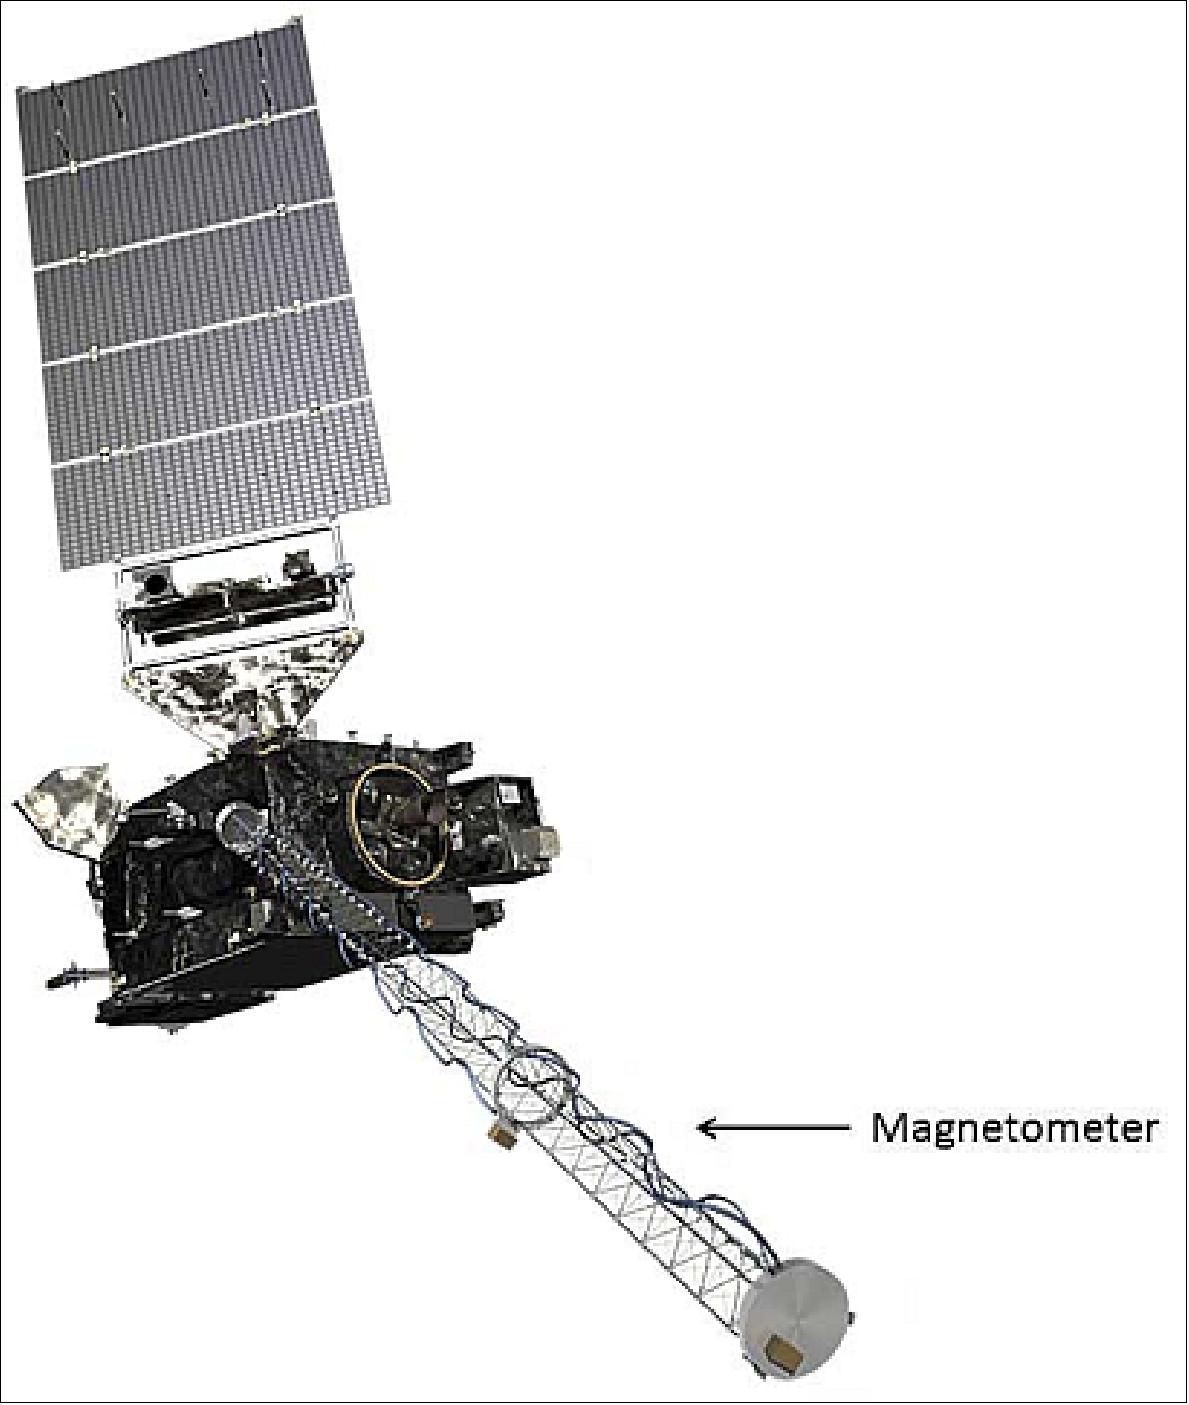 Figure 68: Illustration of the boom-mounted MAG device (image credit: GOES-R project)